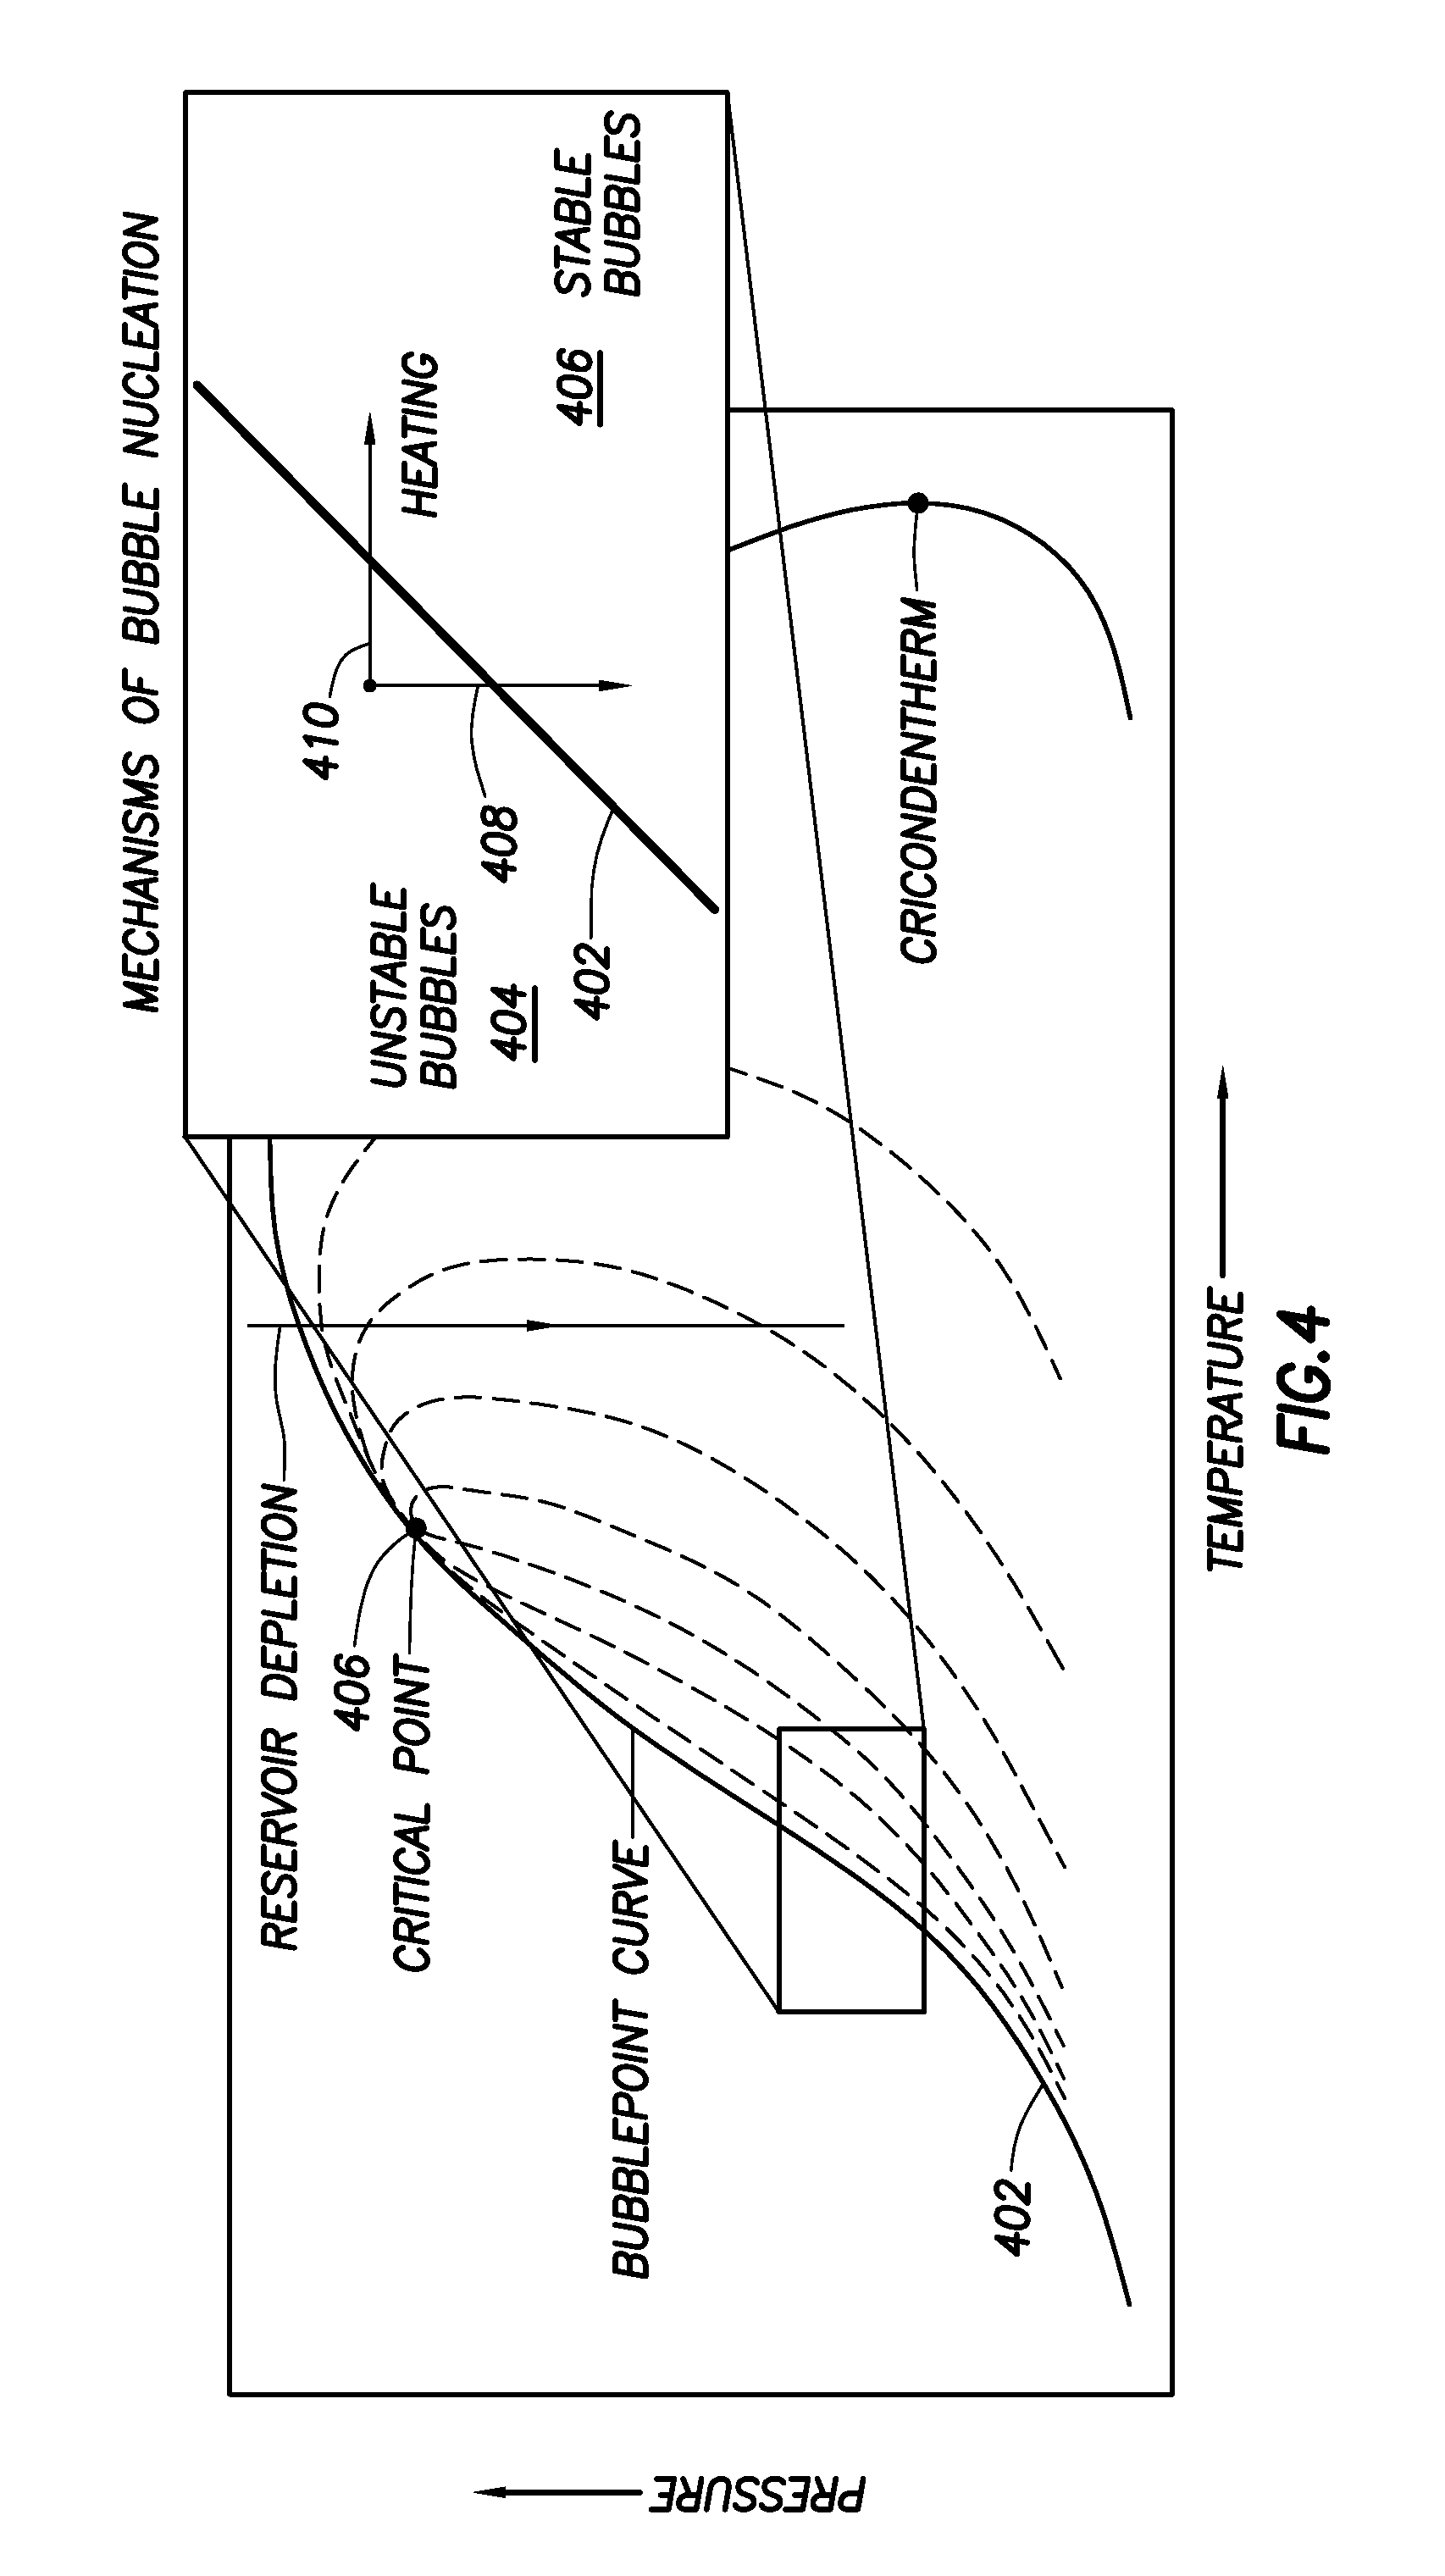 Thermal bubble point measurement system and method